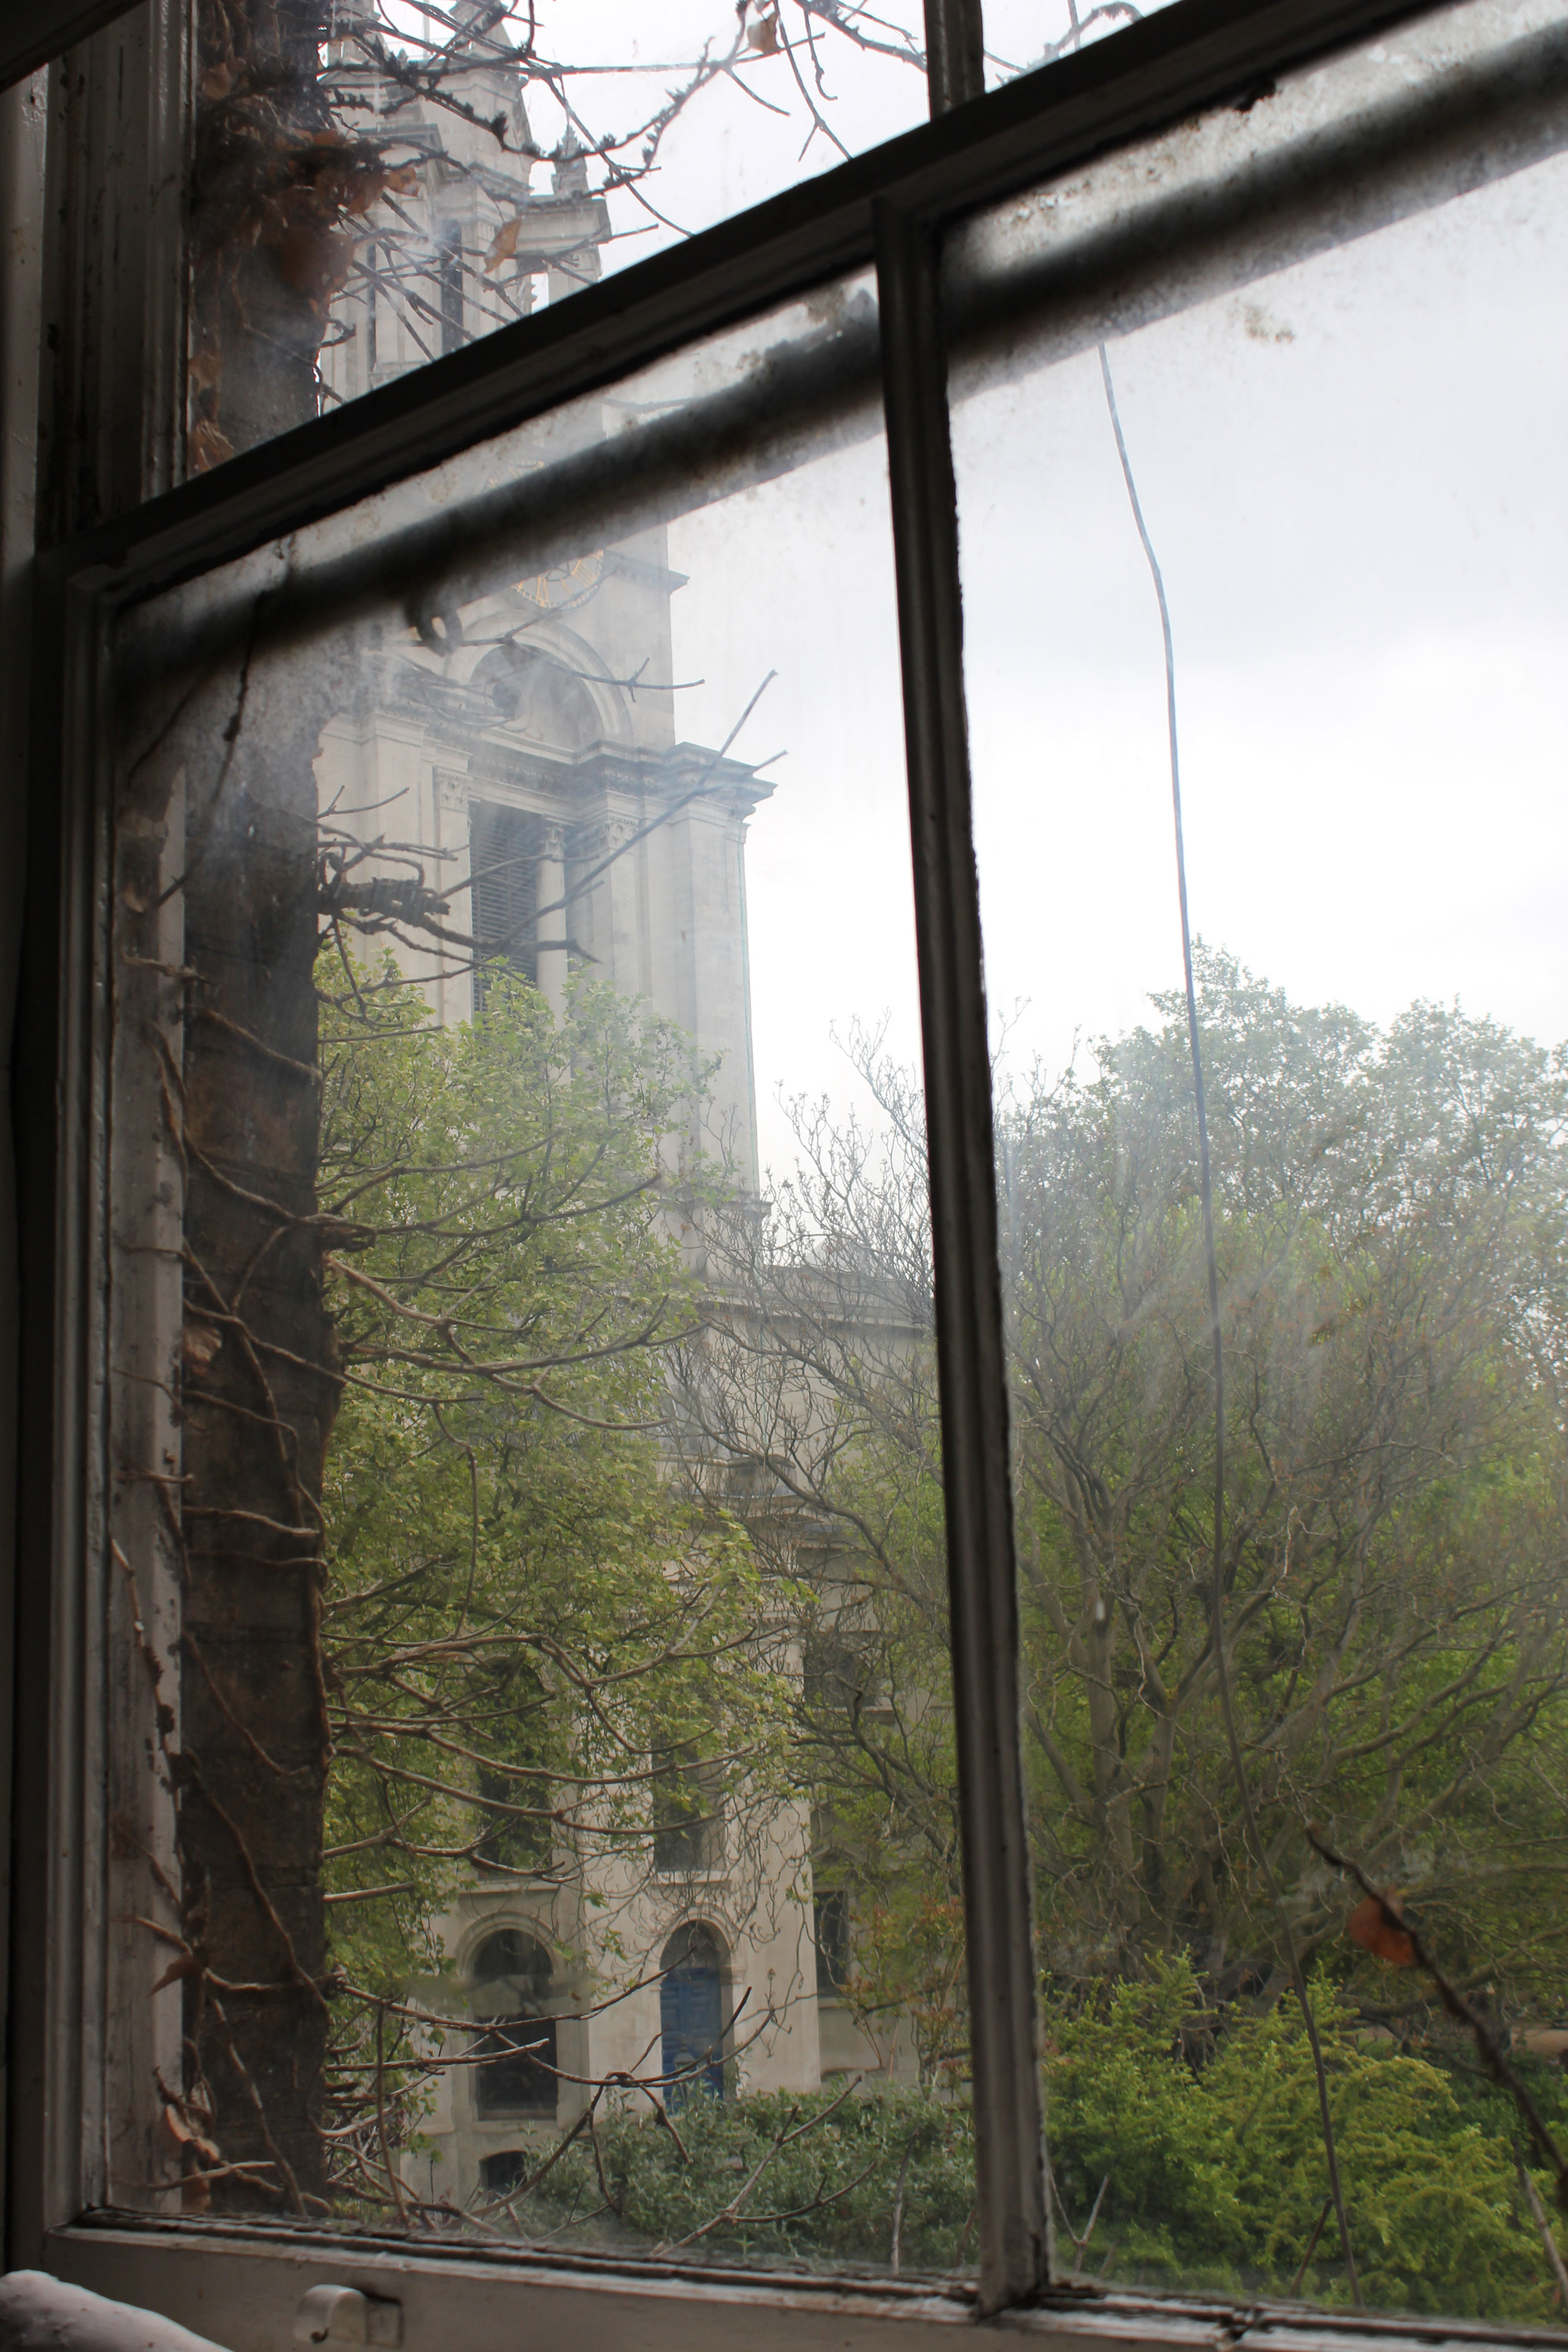 Photo of a window looking out onto St Annes Limehouse from Limehouse Town Hall